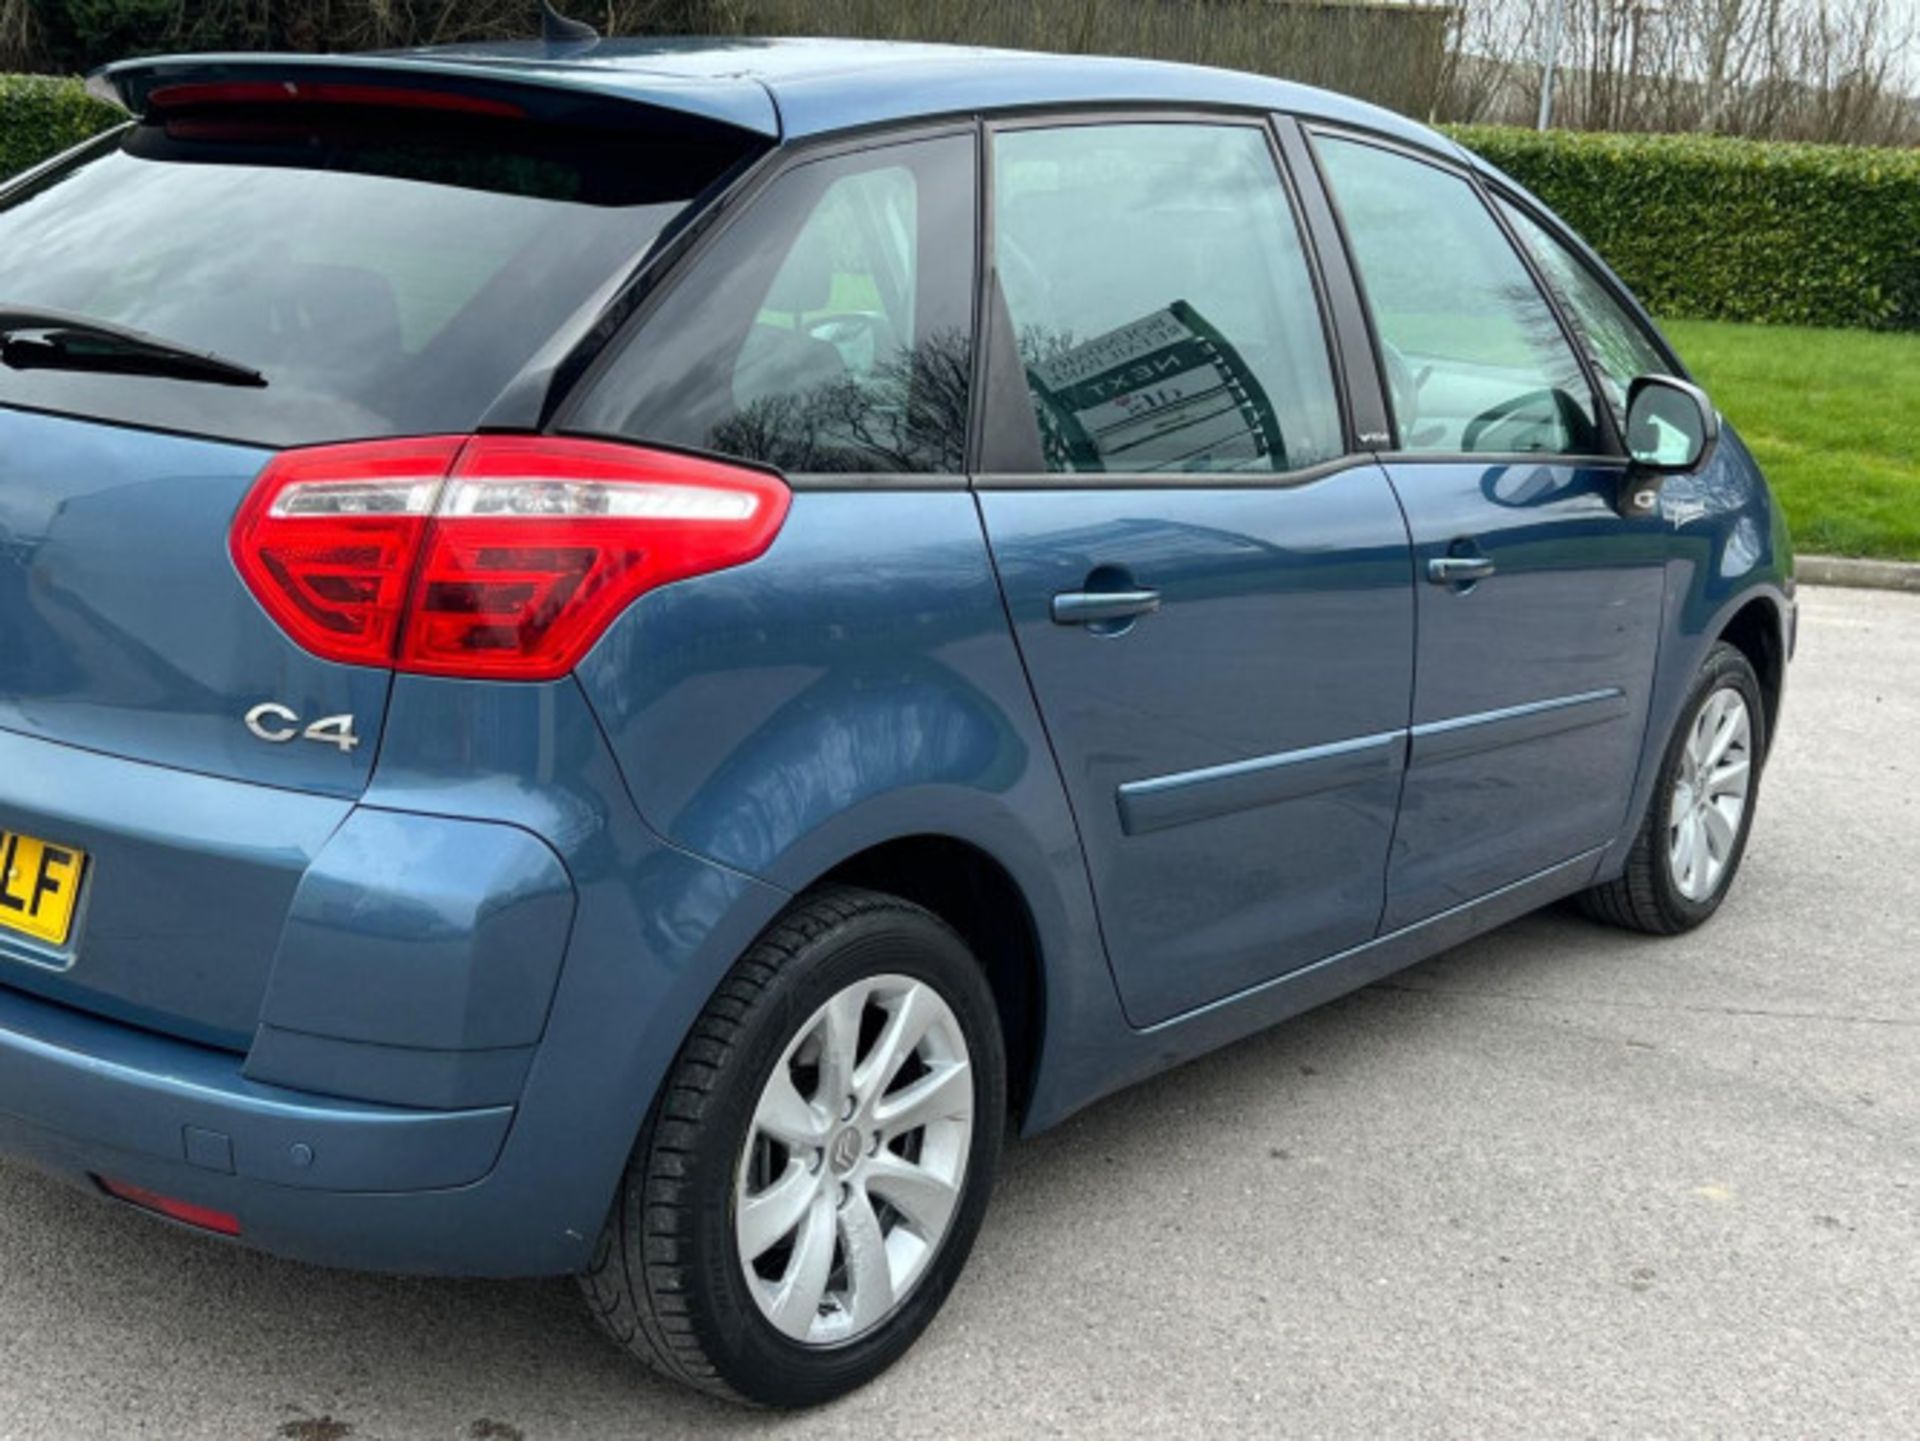 2009 CITROEN C4 PICASSO 1.6 HDI VTR+ EGS6 5DR >>--NO VAT ON HAMMER--<< - Image 98 of 123